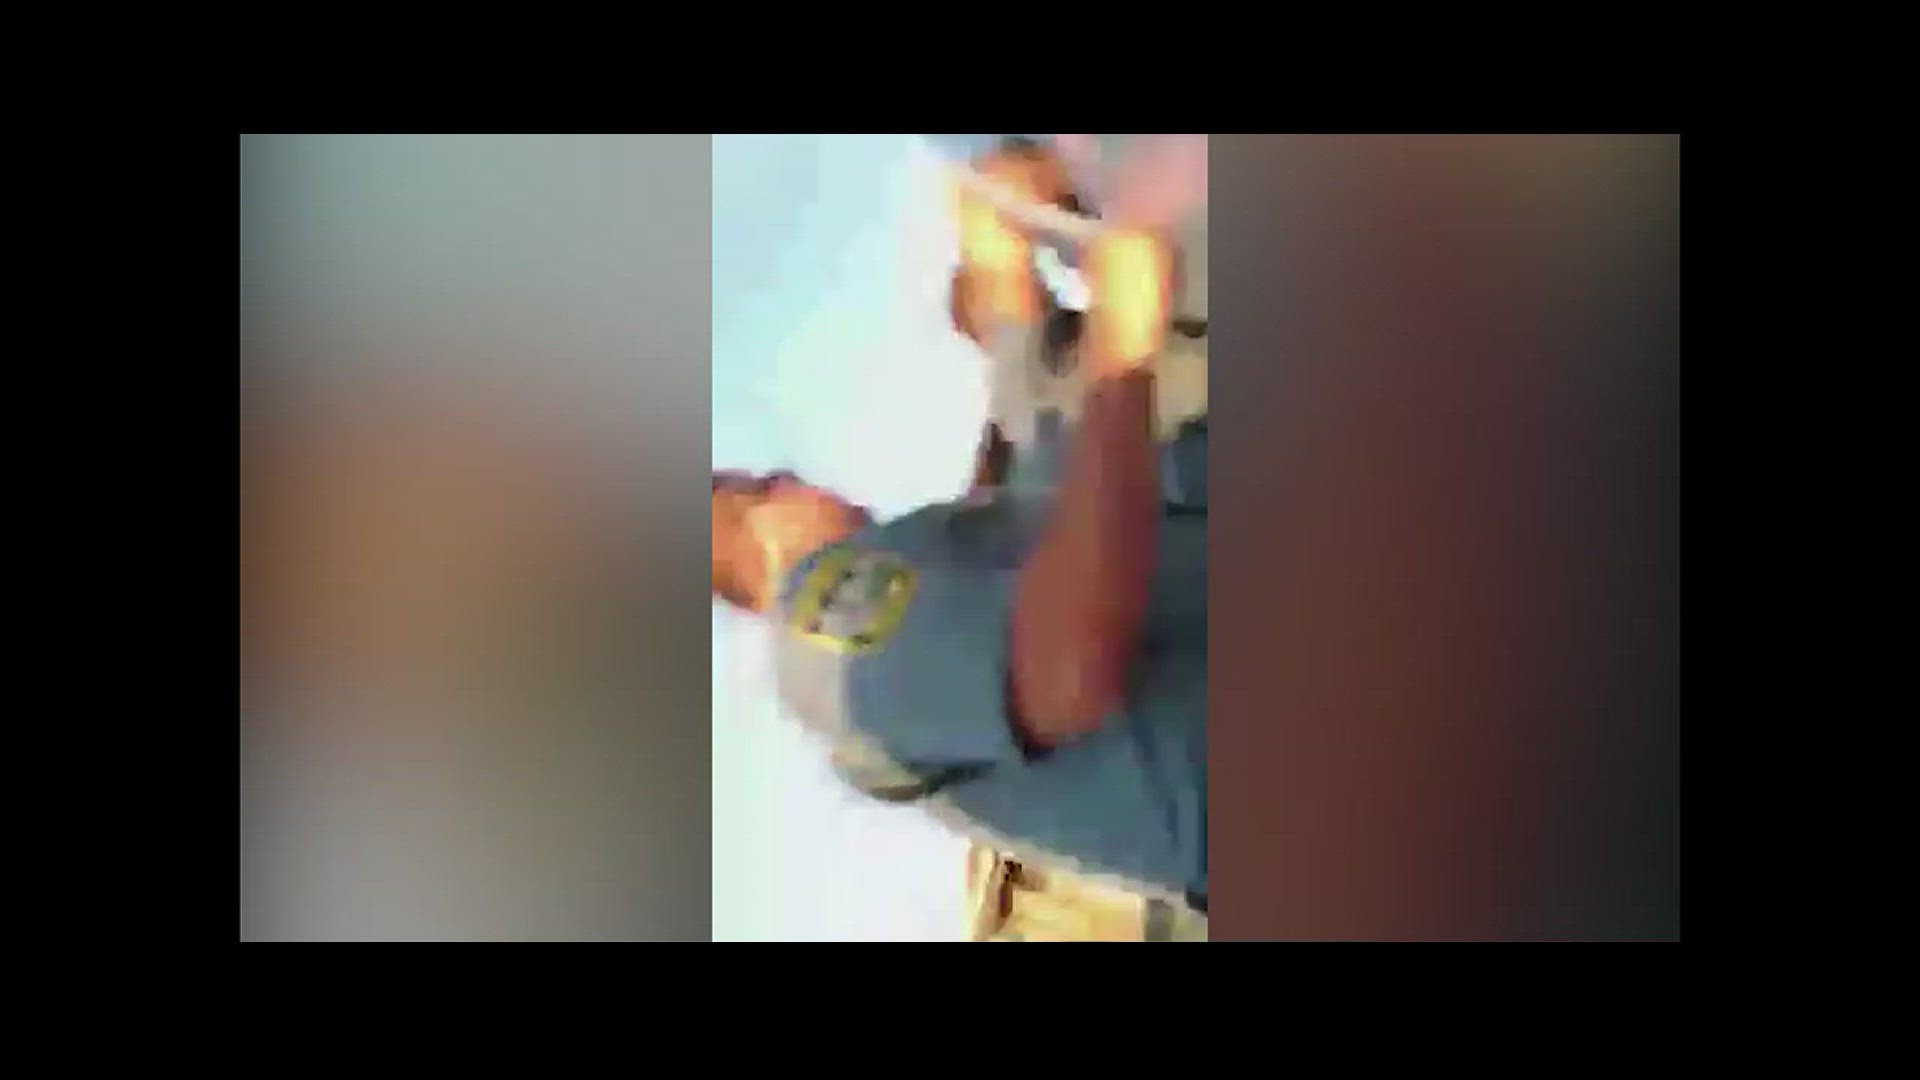 Police say video showing a Terrebonne Parish Sheriff's Deputy challenging a handcuffed suspect to a fight doesn't tell the whole story.